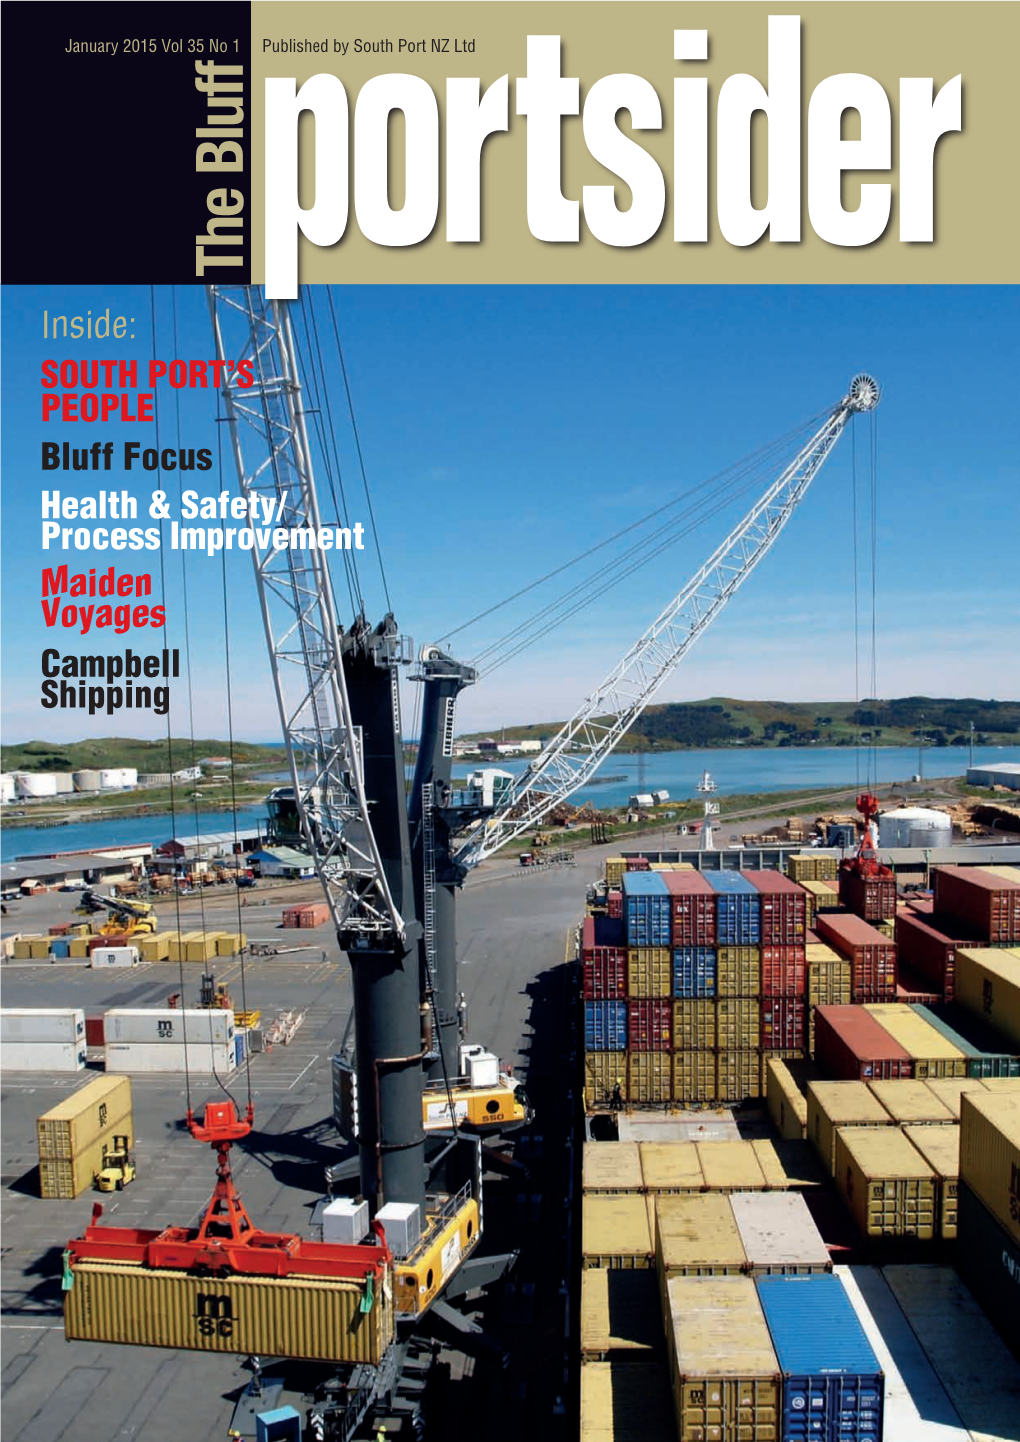 Inside: SOUTH PORT's PEOPLE Bluff Focus Health & Safety